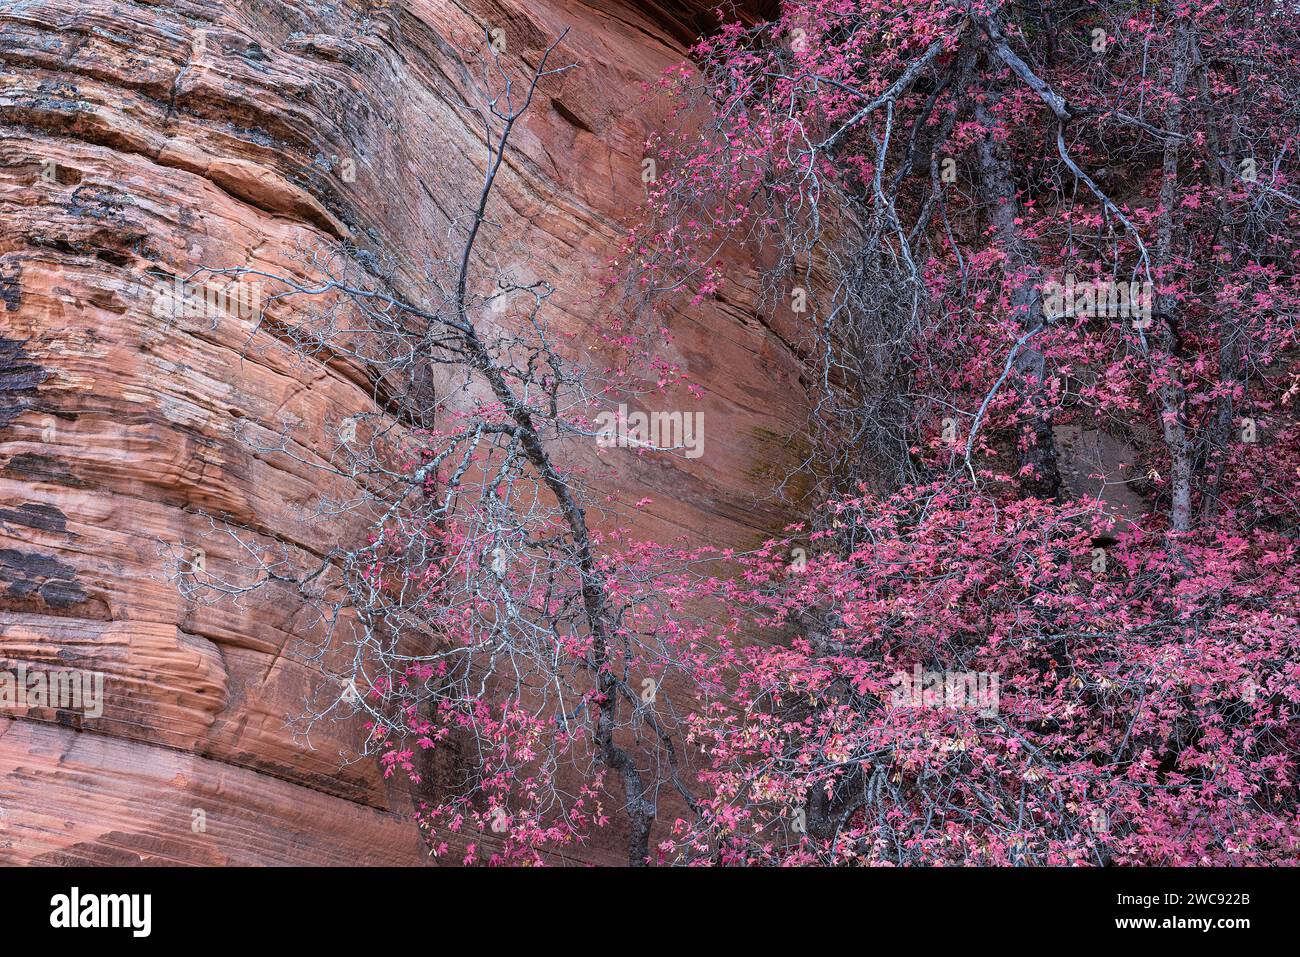 Bigtooth maple in autumn in the Clear Creek section of Zion National Park, Utah Stock Photo